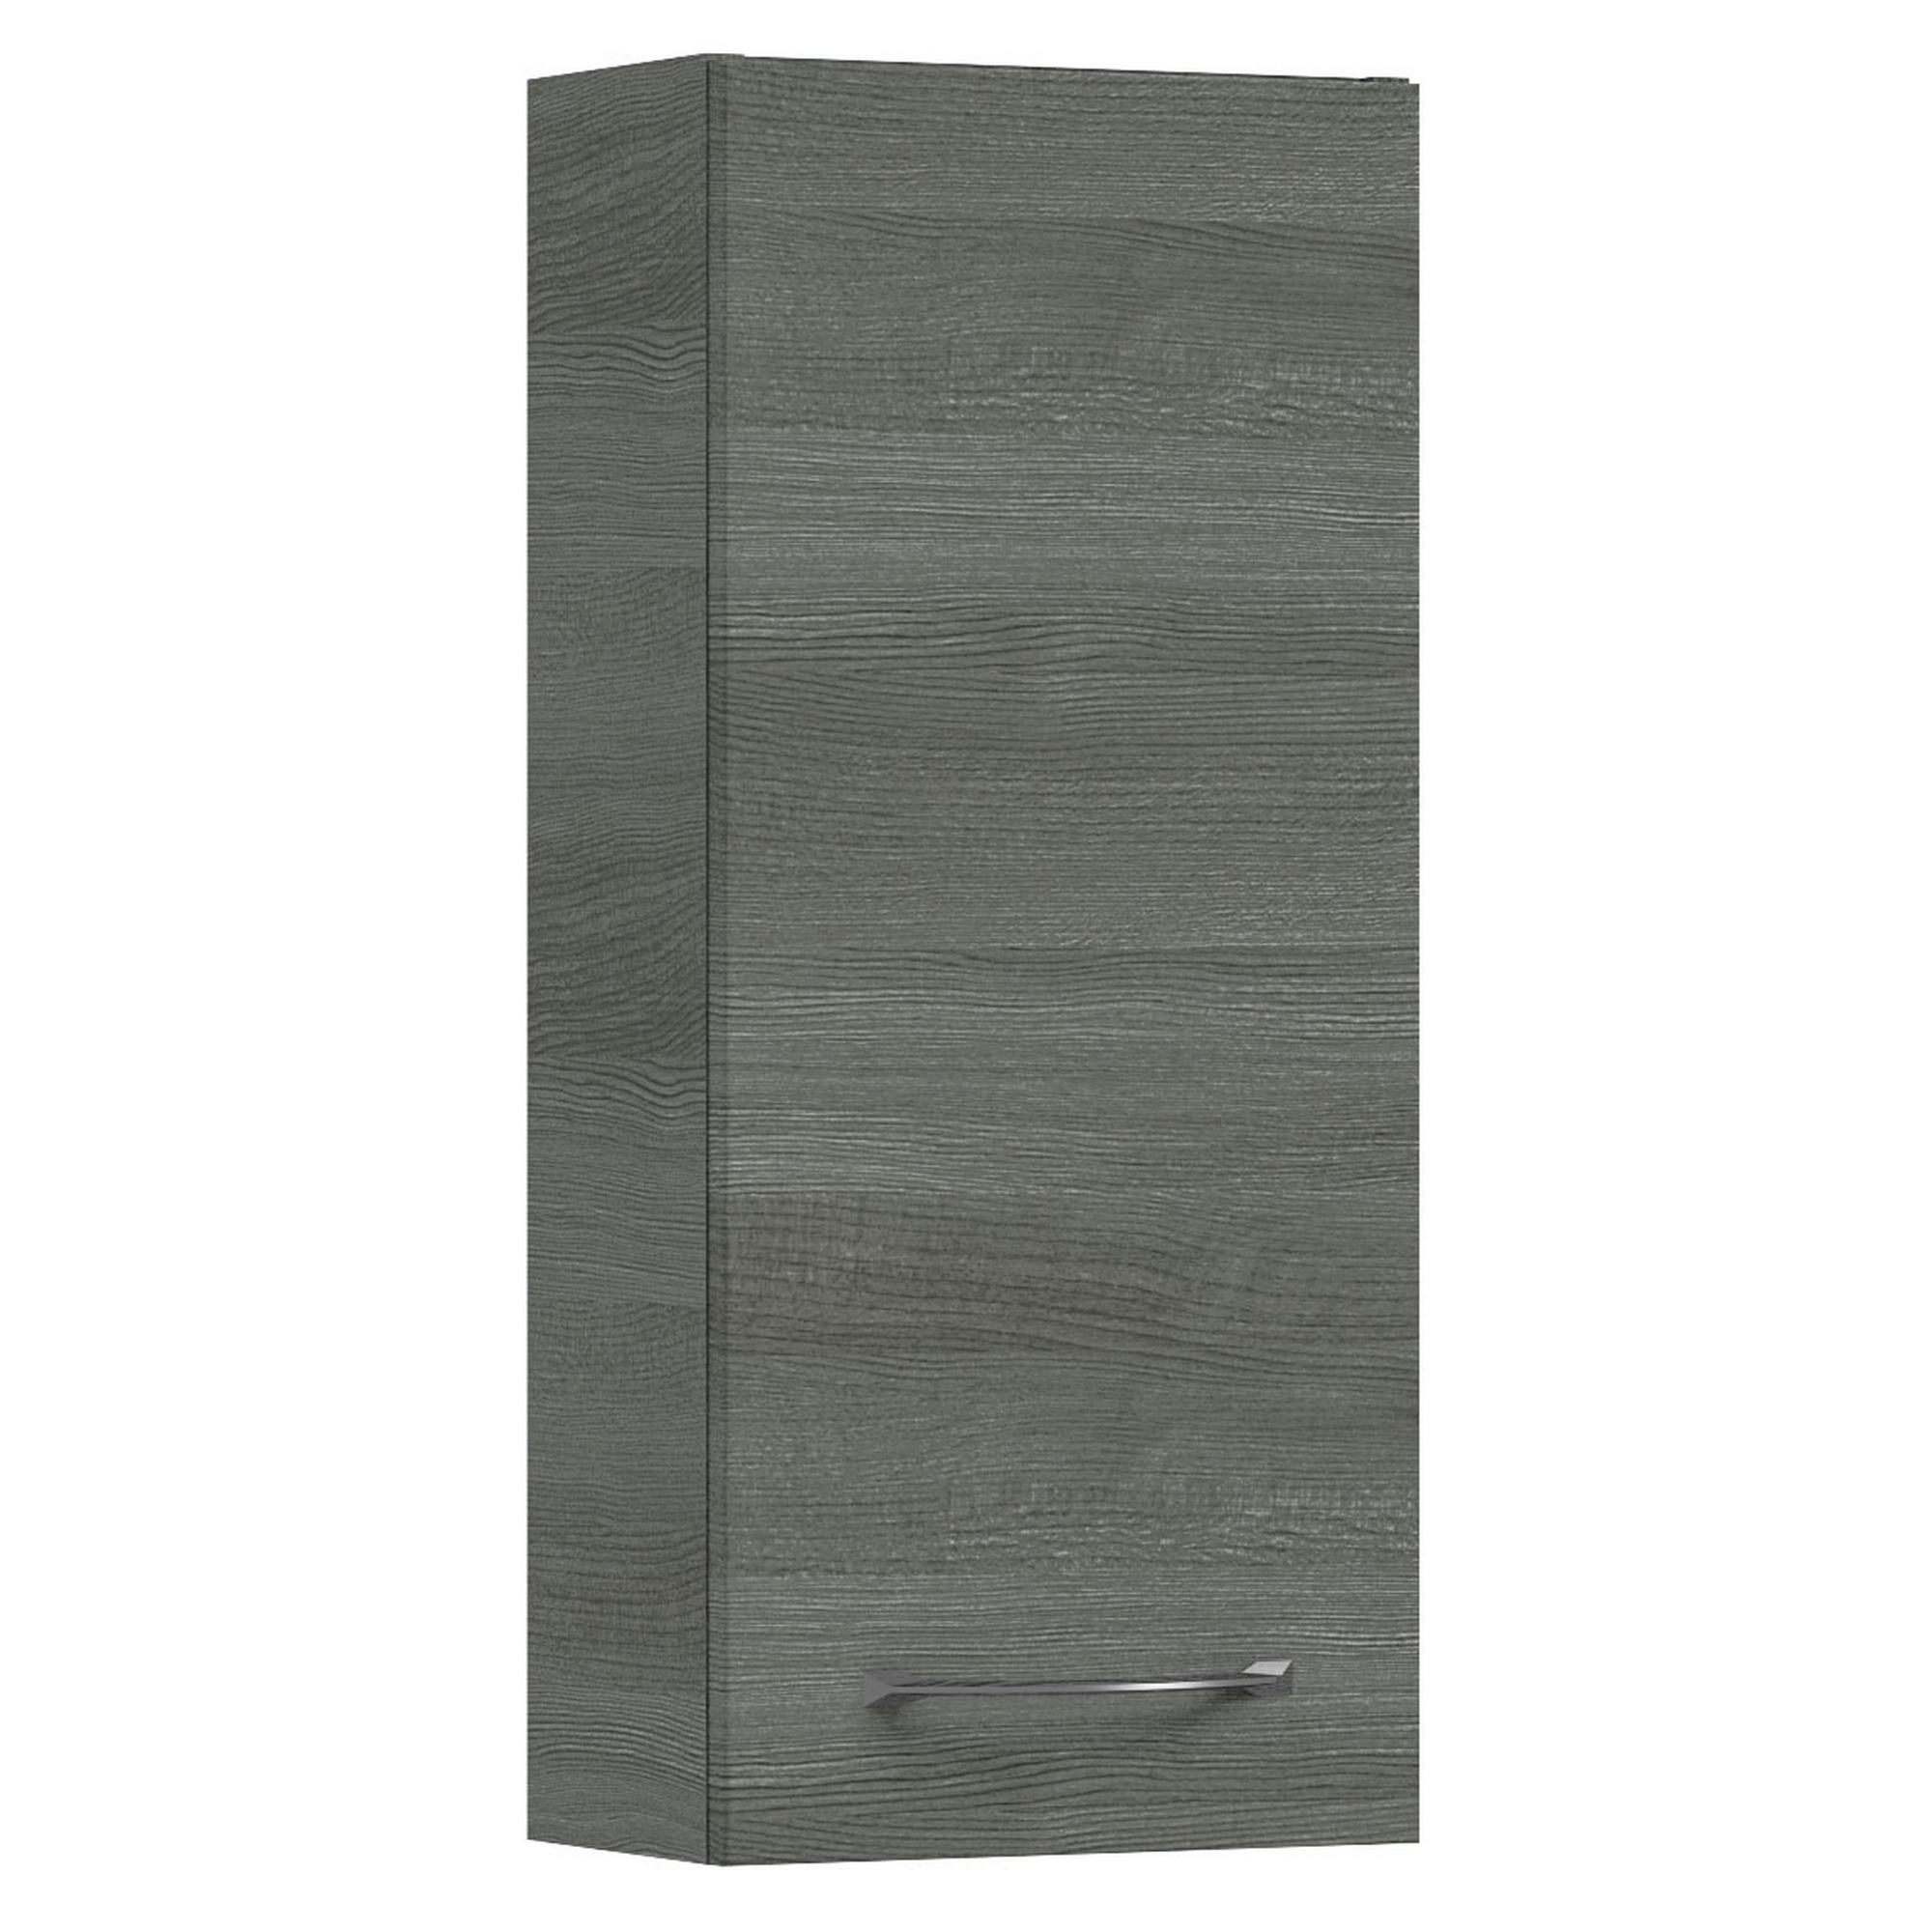 Wandschrank 'Indra' graphitfarben 30 x 70 x 17 cm + product picture